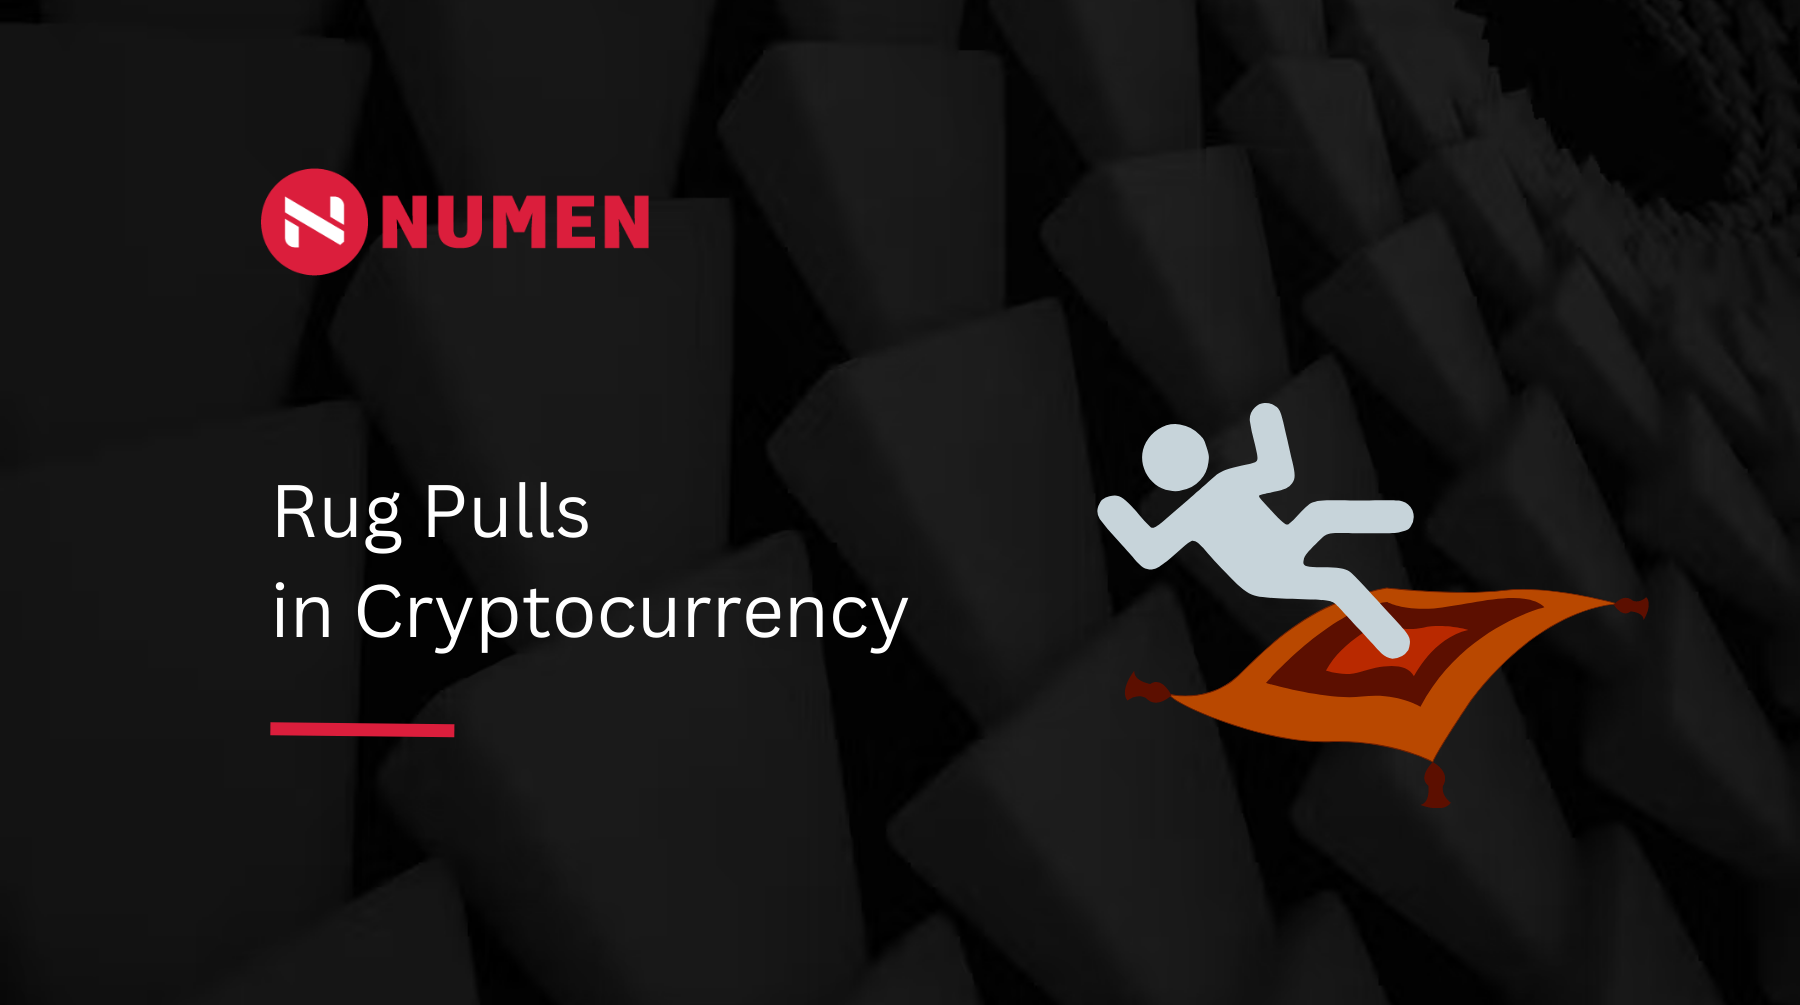 Rug Pulls in Cryptocurrency Graphic